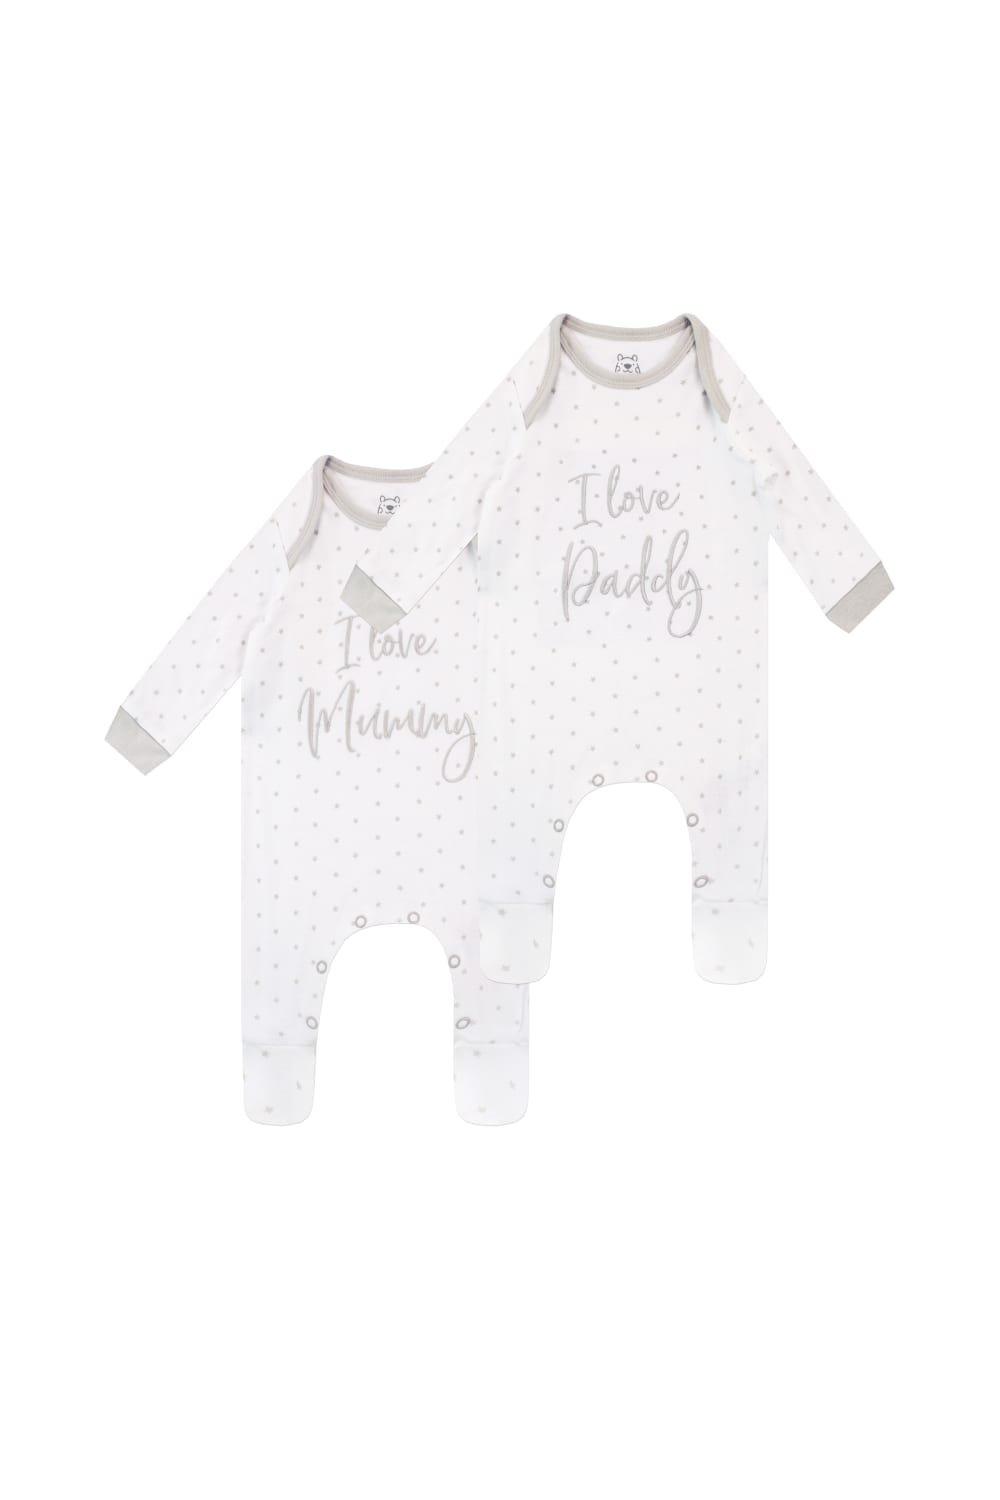 Baby I Love Mummy And Daddy Sleepsuits 2 Pack